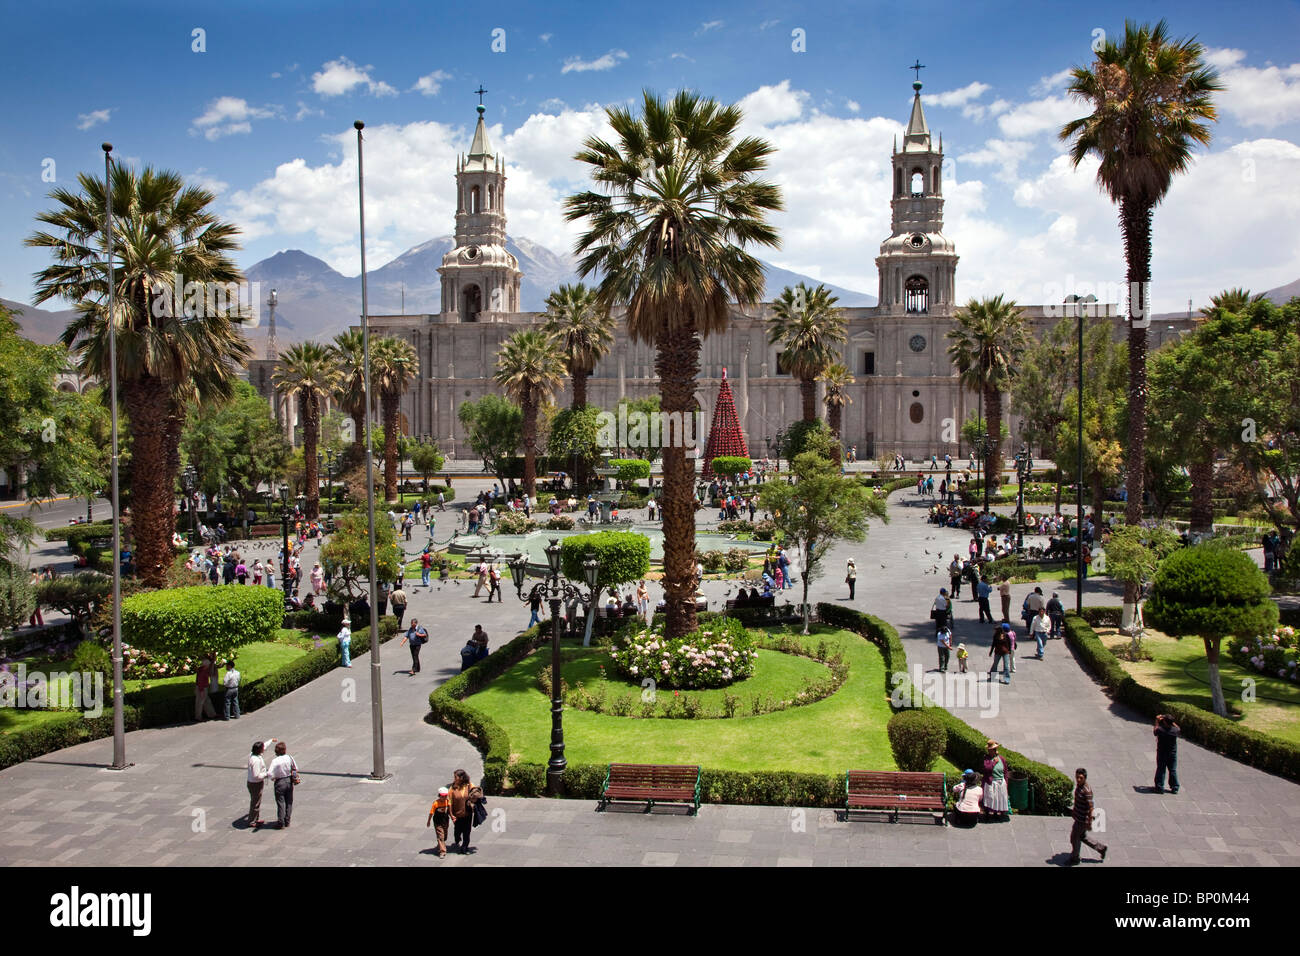 Peru, Arequipa Cathedral in the main square, Plaza de Armas. Built with sillar, a stone mined from the extinct Chachani volcano. Stock Photo